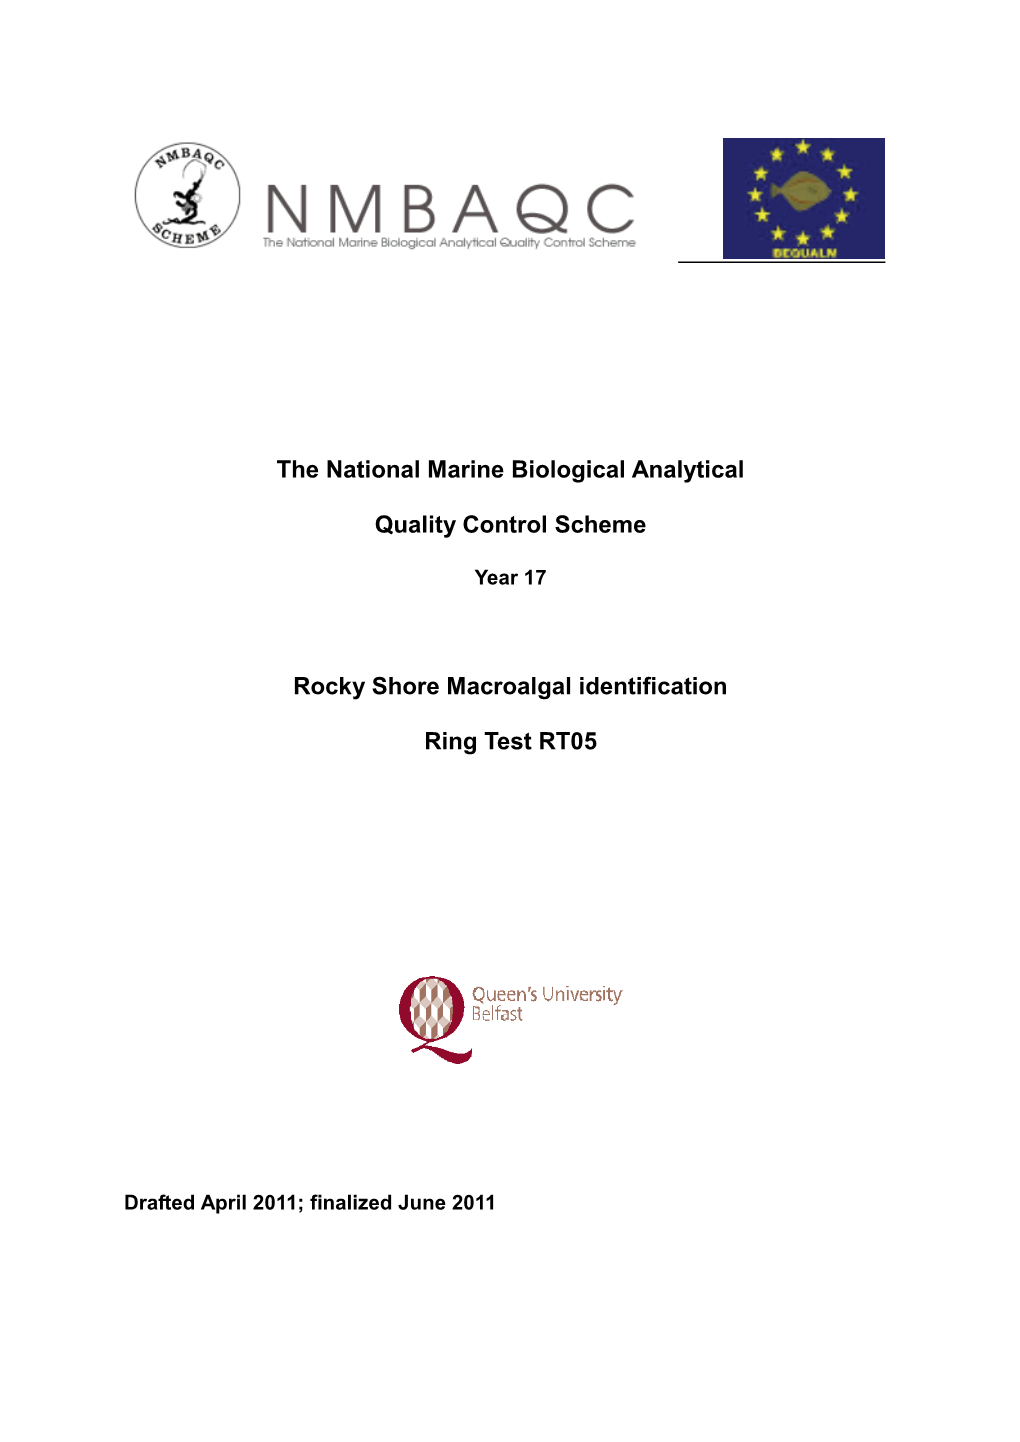 The National Marine Biological Analytical Quality Control Scheme Rocky Shore Macroalgal Identification Ring Test RT05